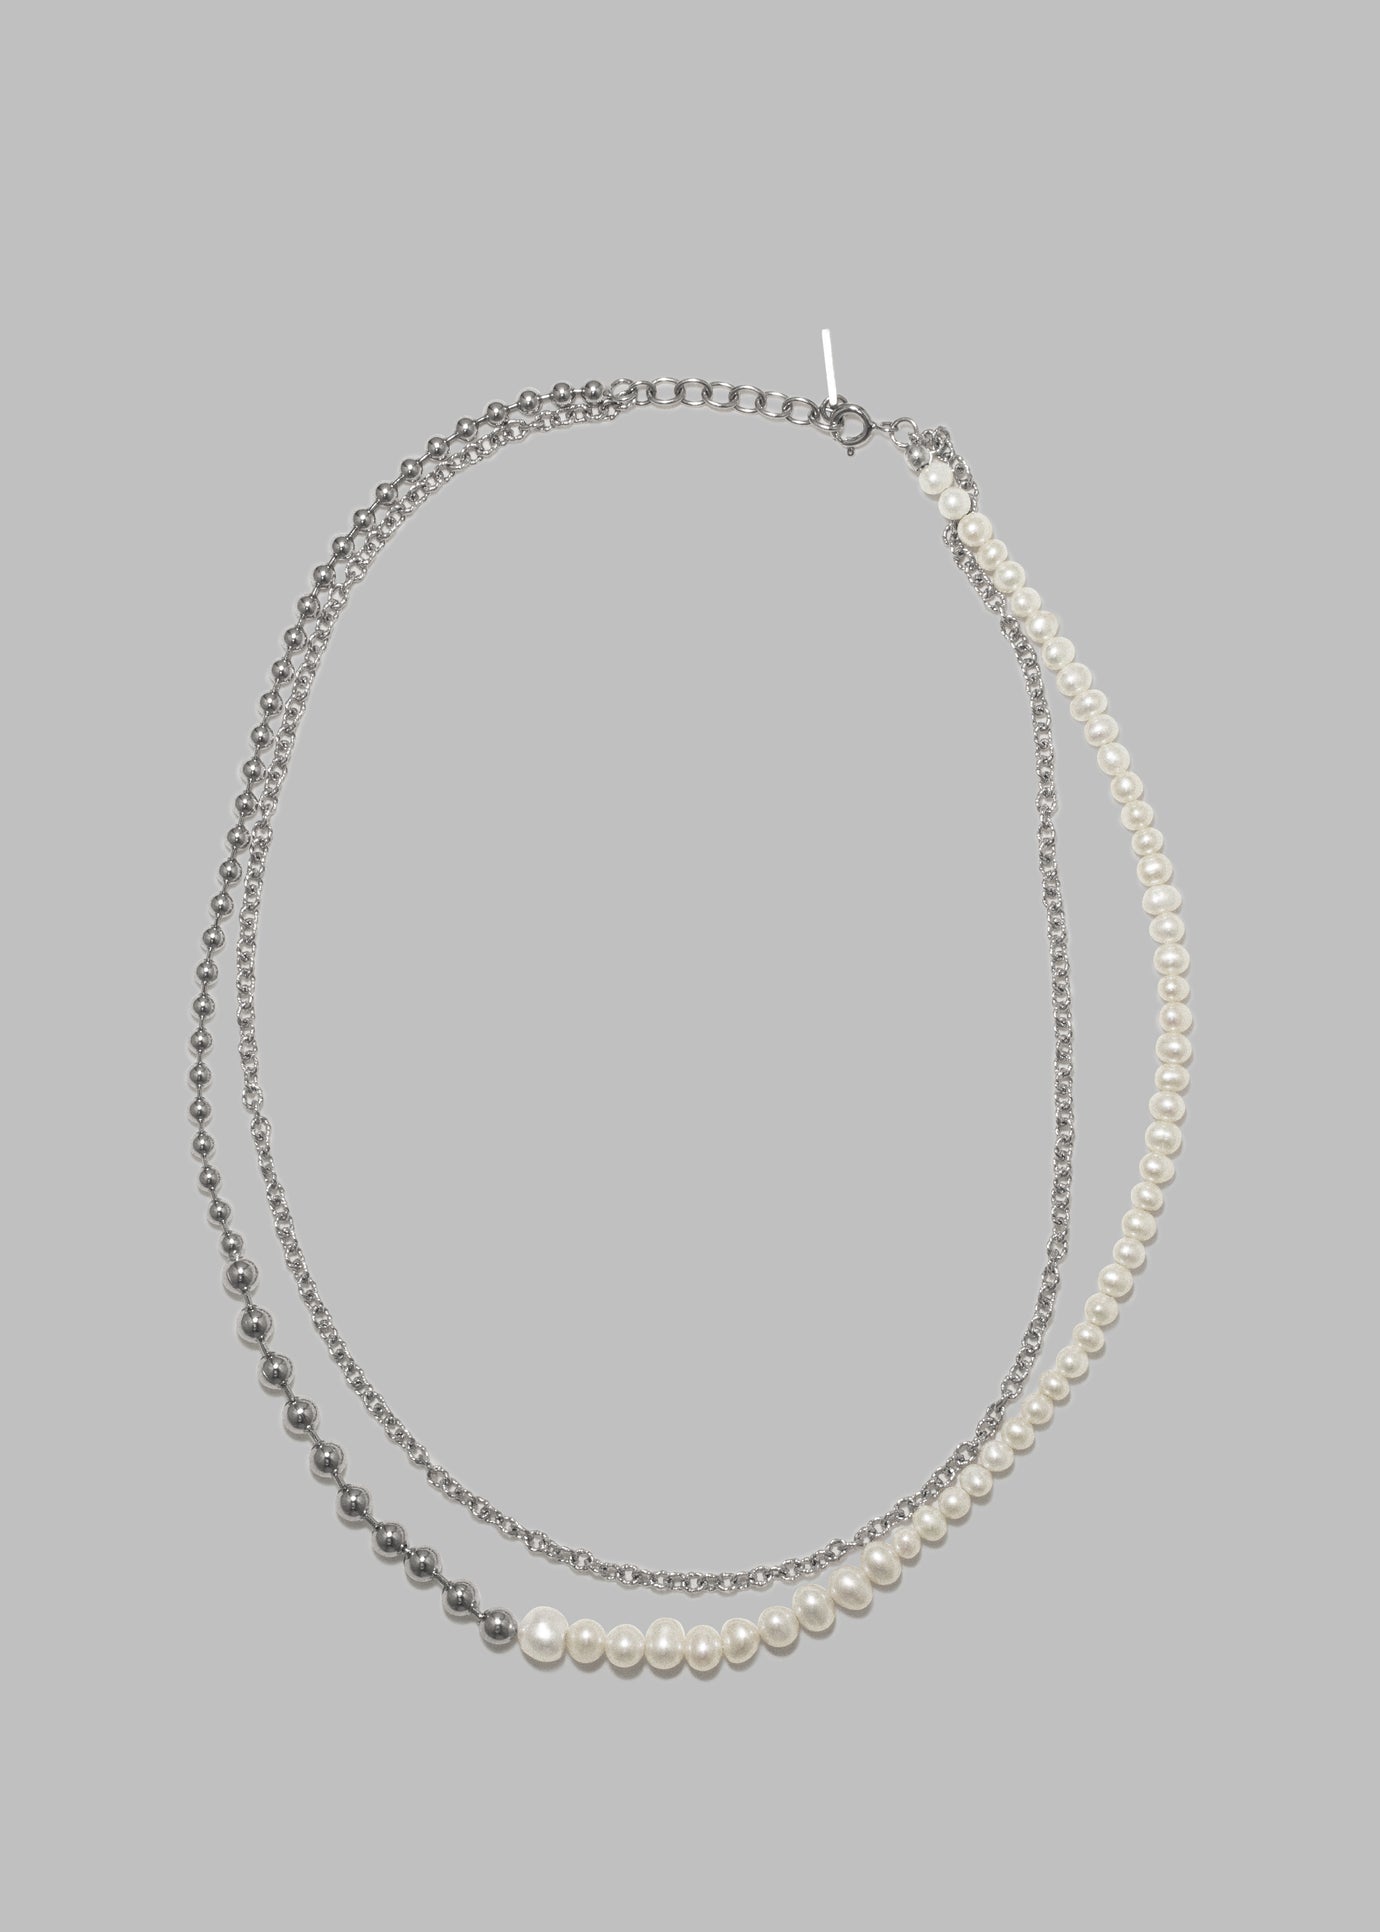 Completedworks Forgotten Seas Necklace - Pearl/Rhodium Plate - 1